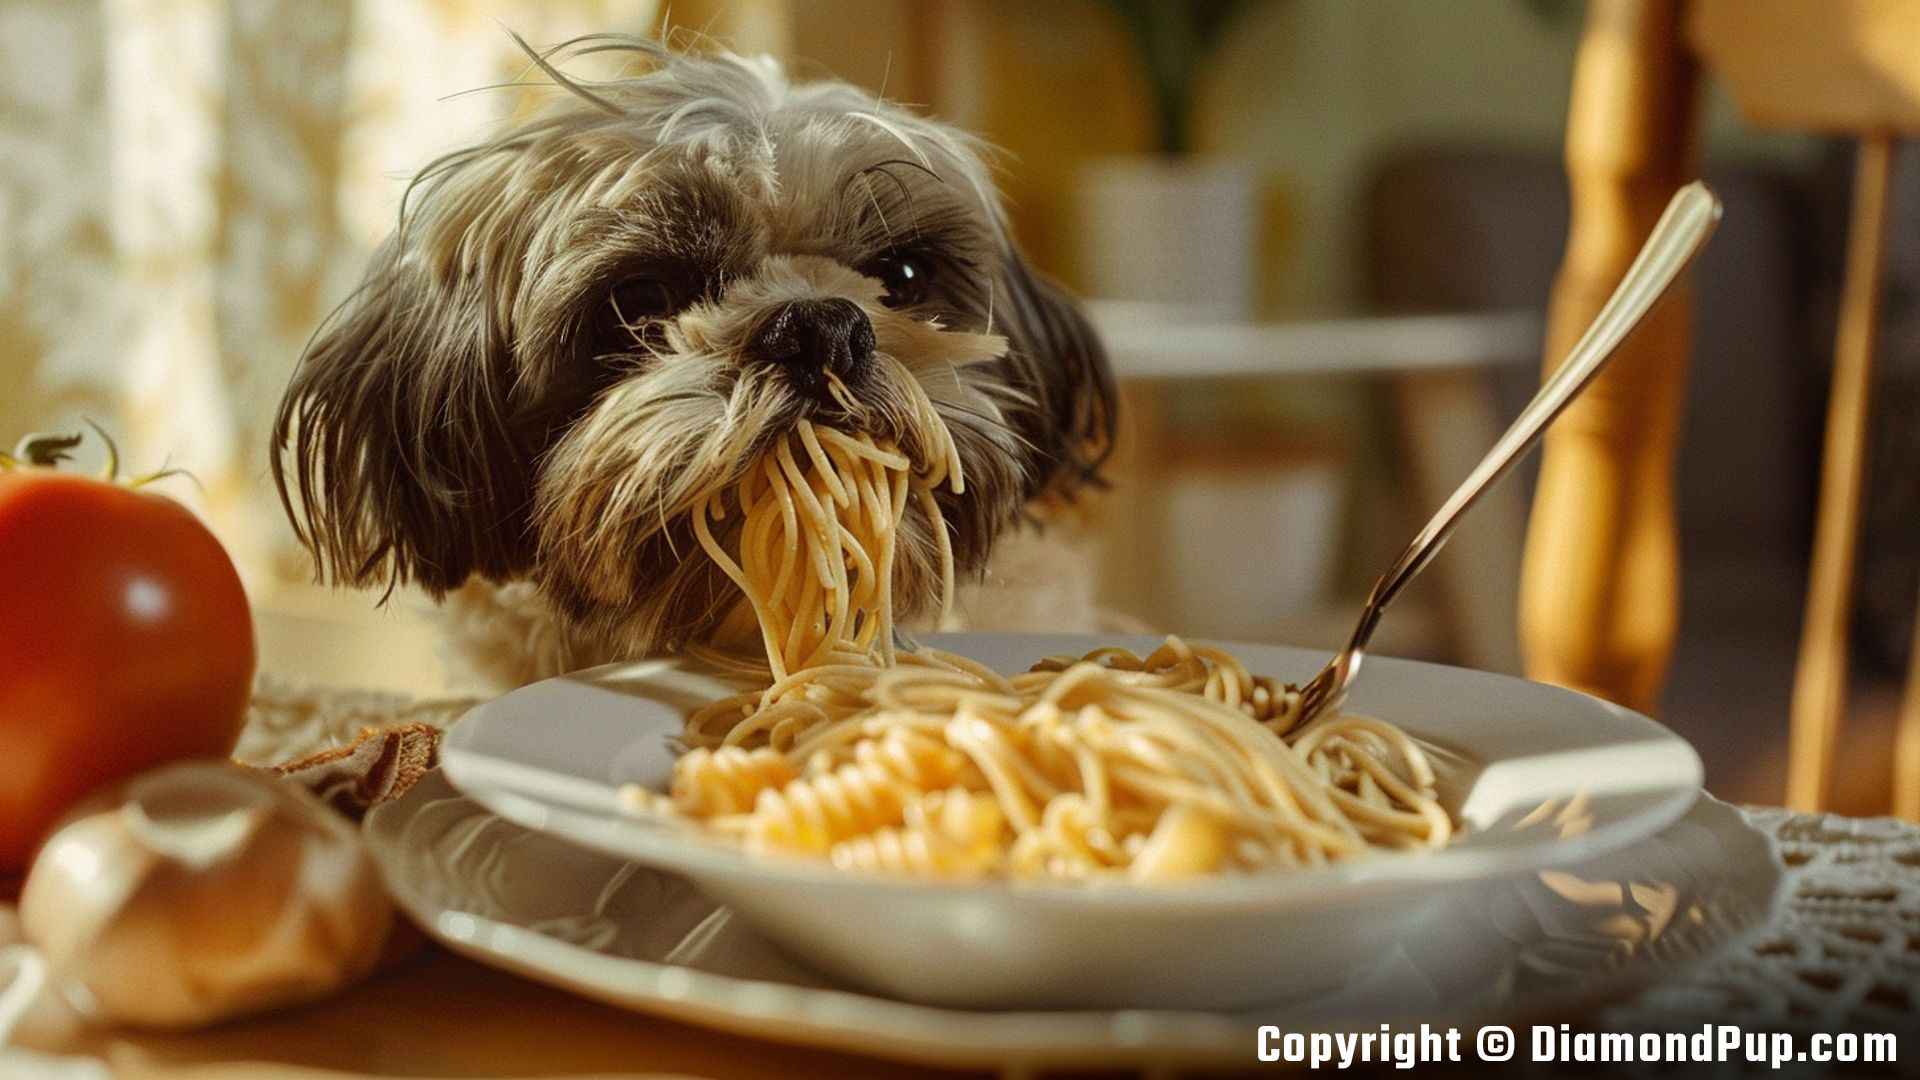 Photograph of Shih Tzu Snacking on Pasta